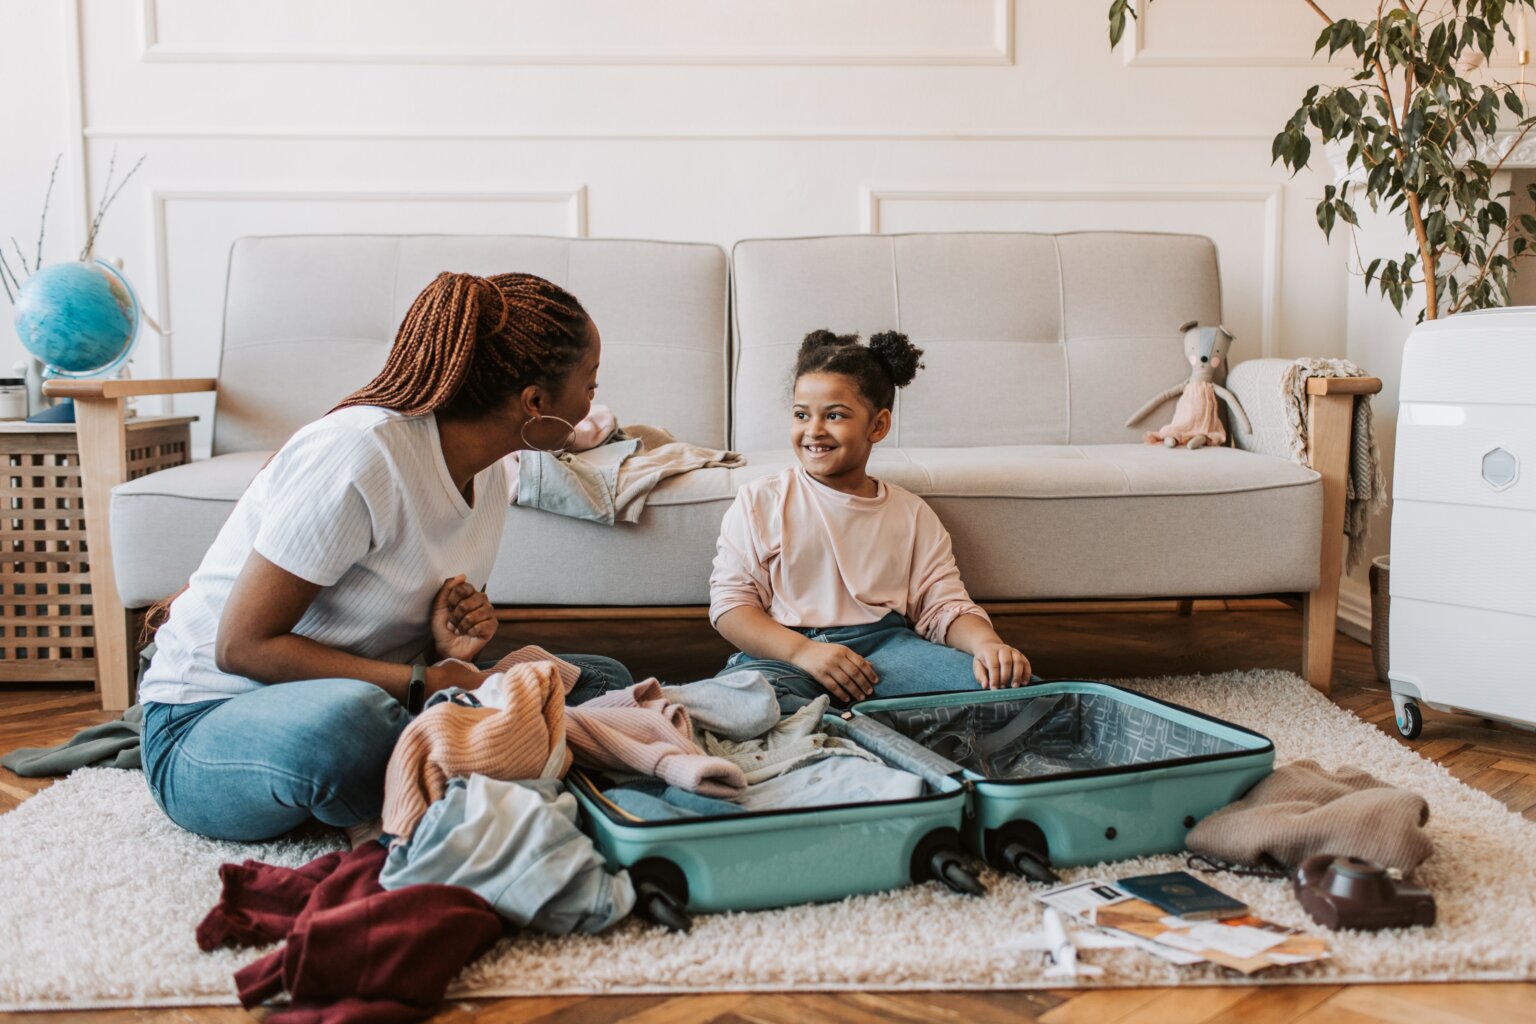 A mom and daughter sitting on the floor of a living room and packing a suitcase.